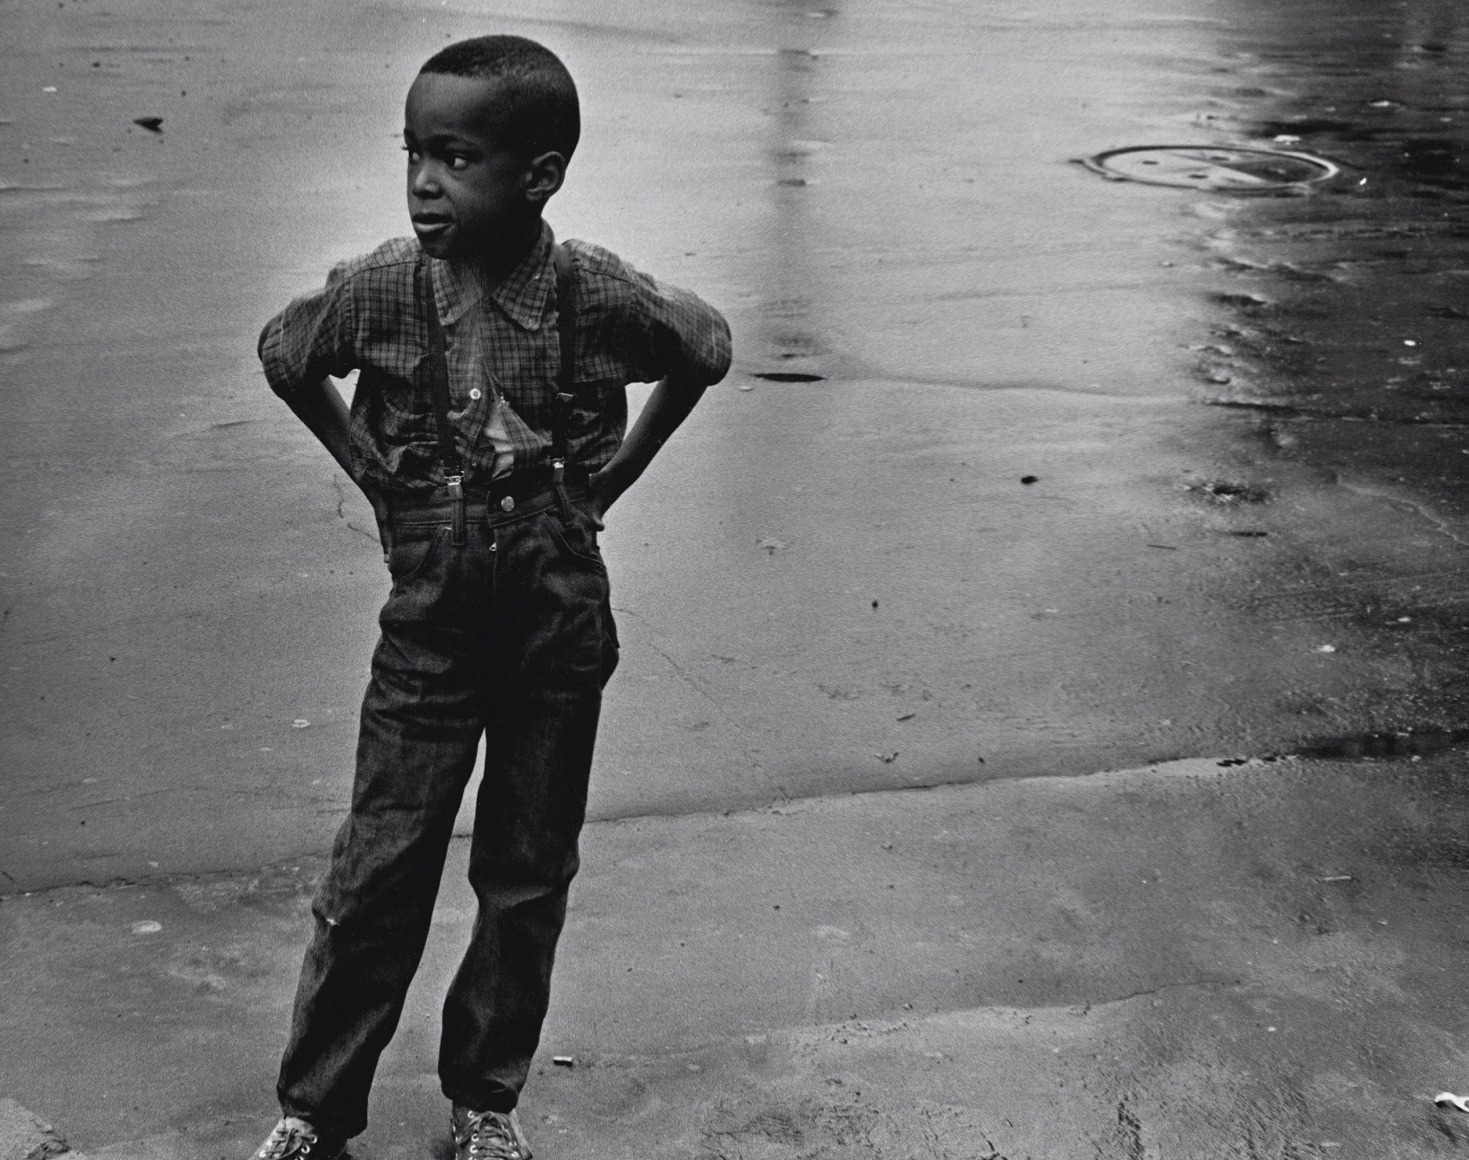 22. Beuford Smith, Boy in Street, Brooklyn, ​1969. A young boy stands on a wet street with hands on hips, looking to the left of the frame.